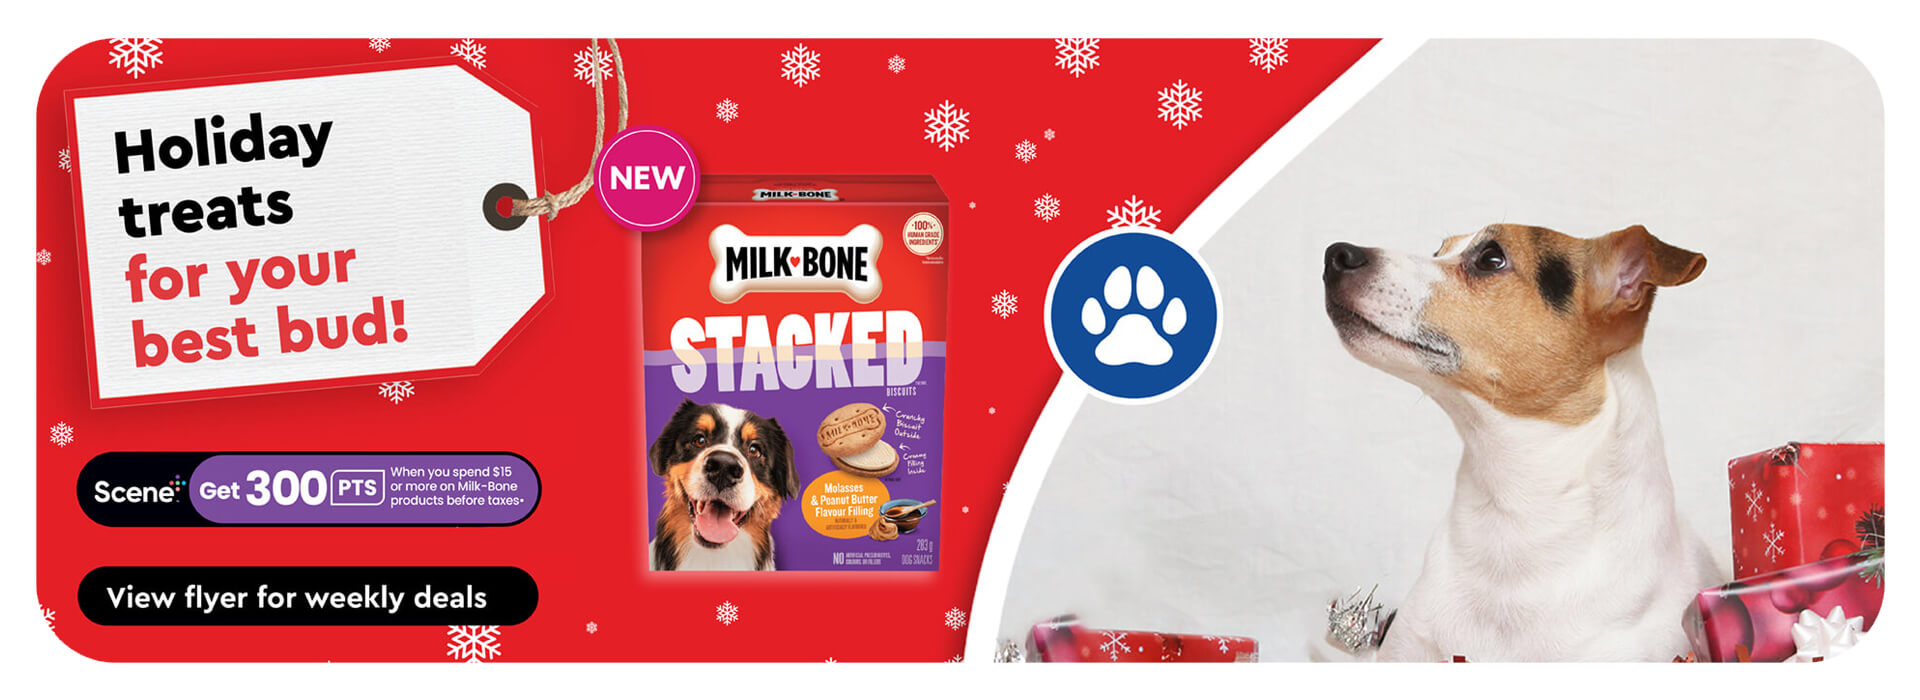 Text Reading ‘Holiday treats for your best bud! Sceneplus. Get 300 points when you spend $15 or more on milk products before taxes. 'View flyer for ‘weekly deals by clicking the button below.'